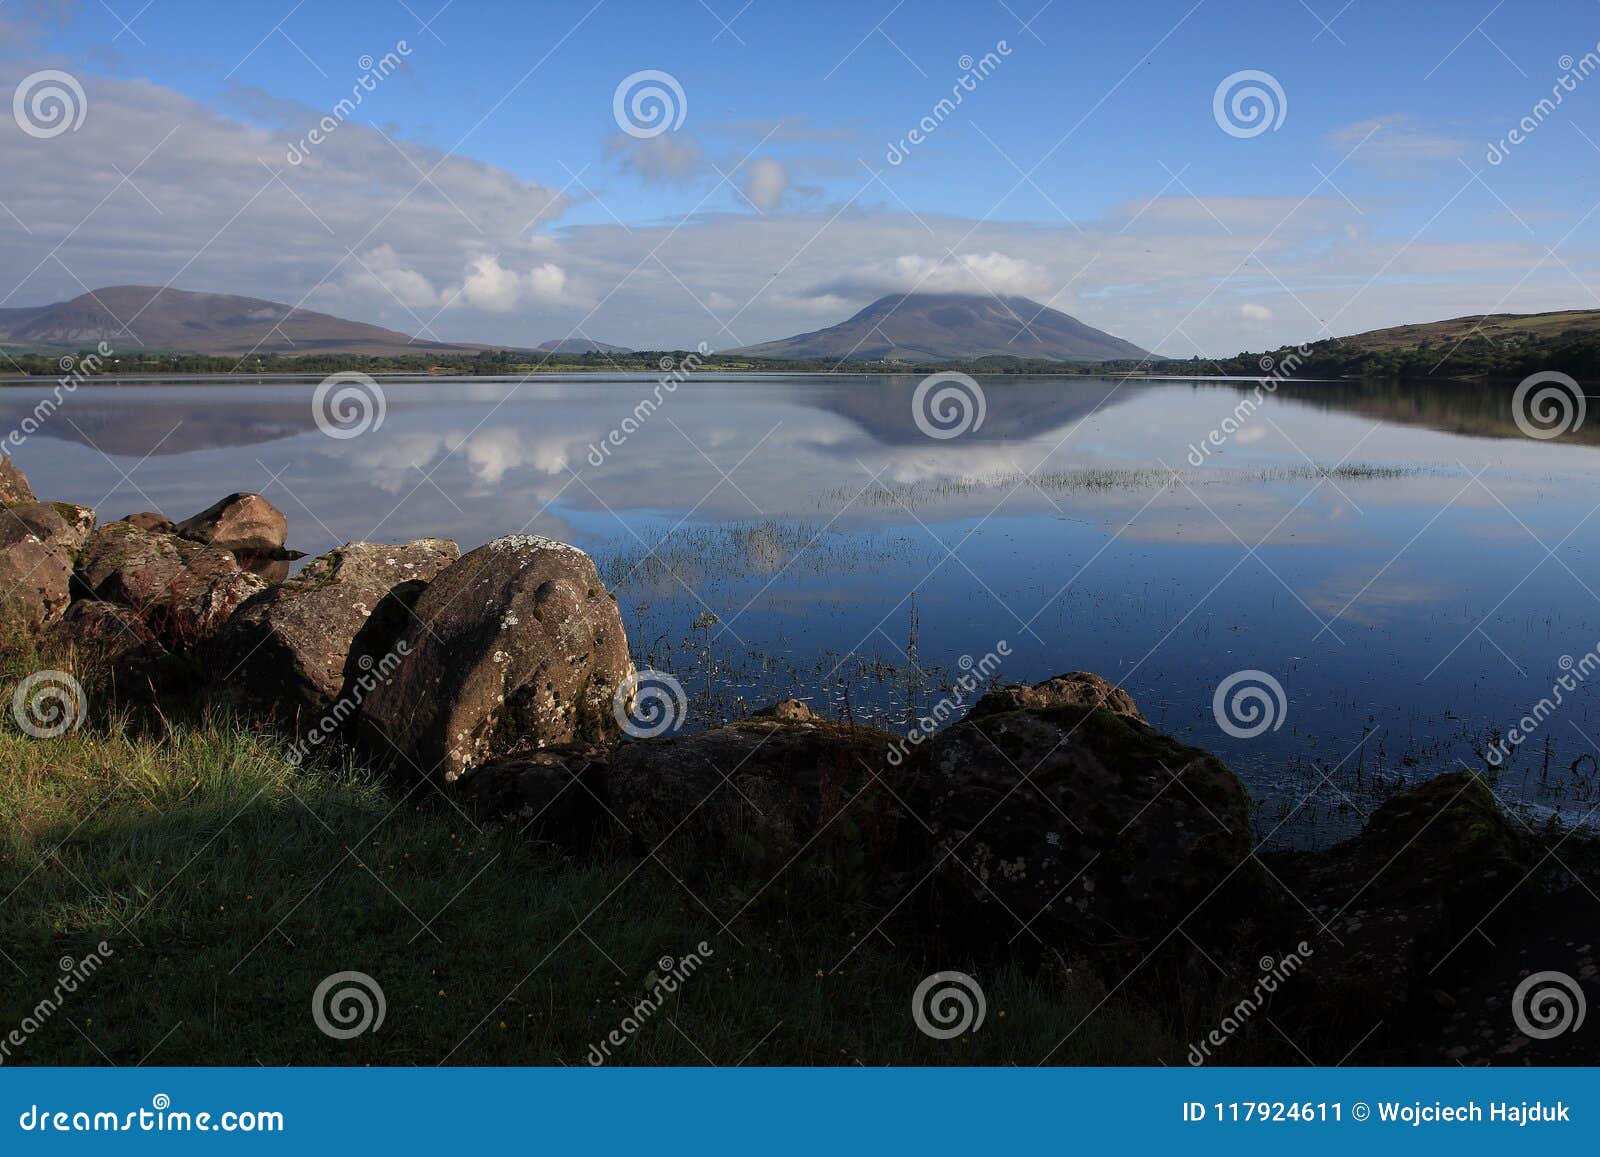 Nephin Mountain in Water Reflection Stock Image - Image of green ...